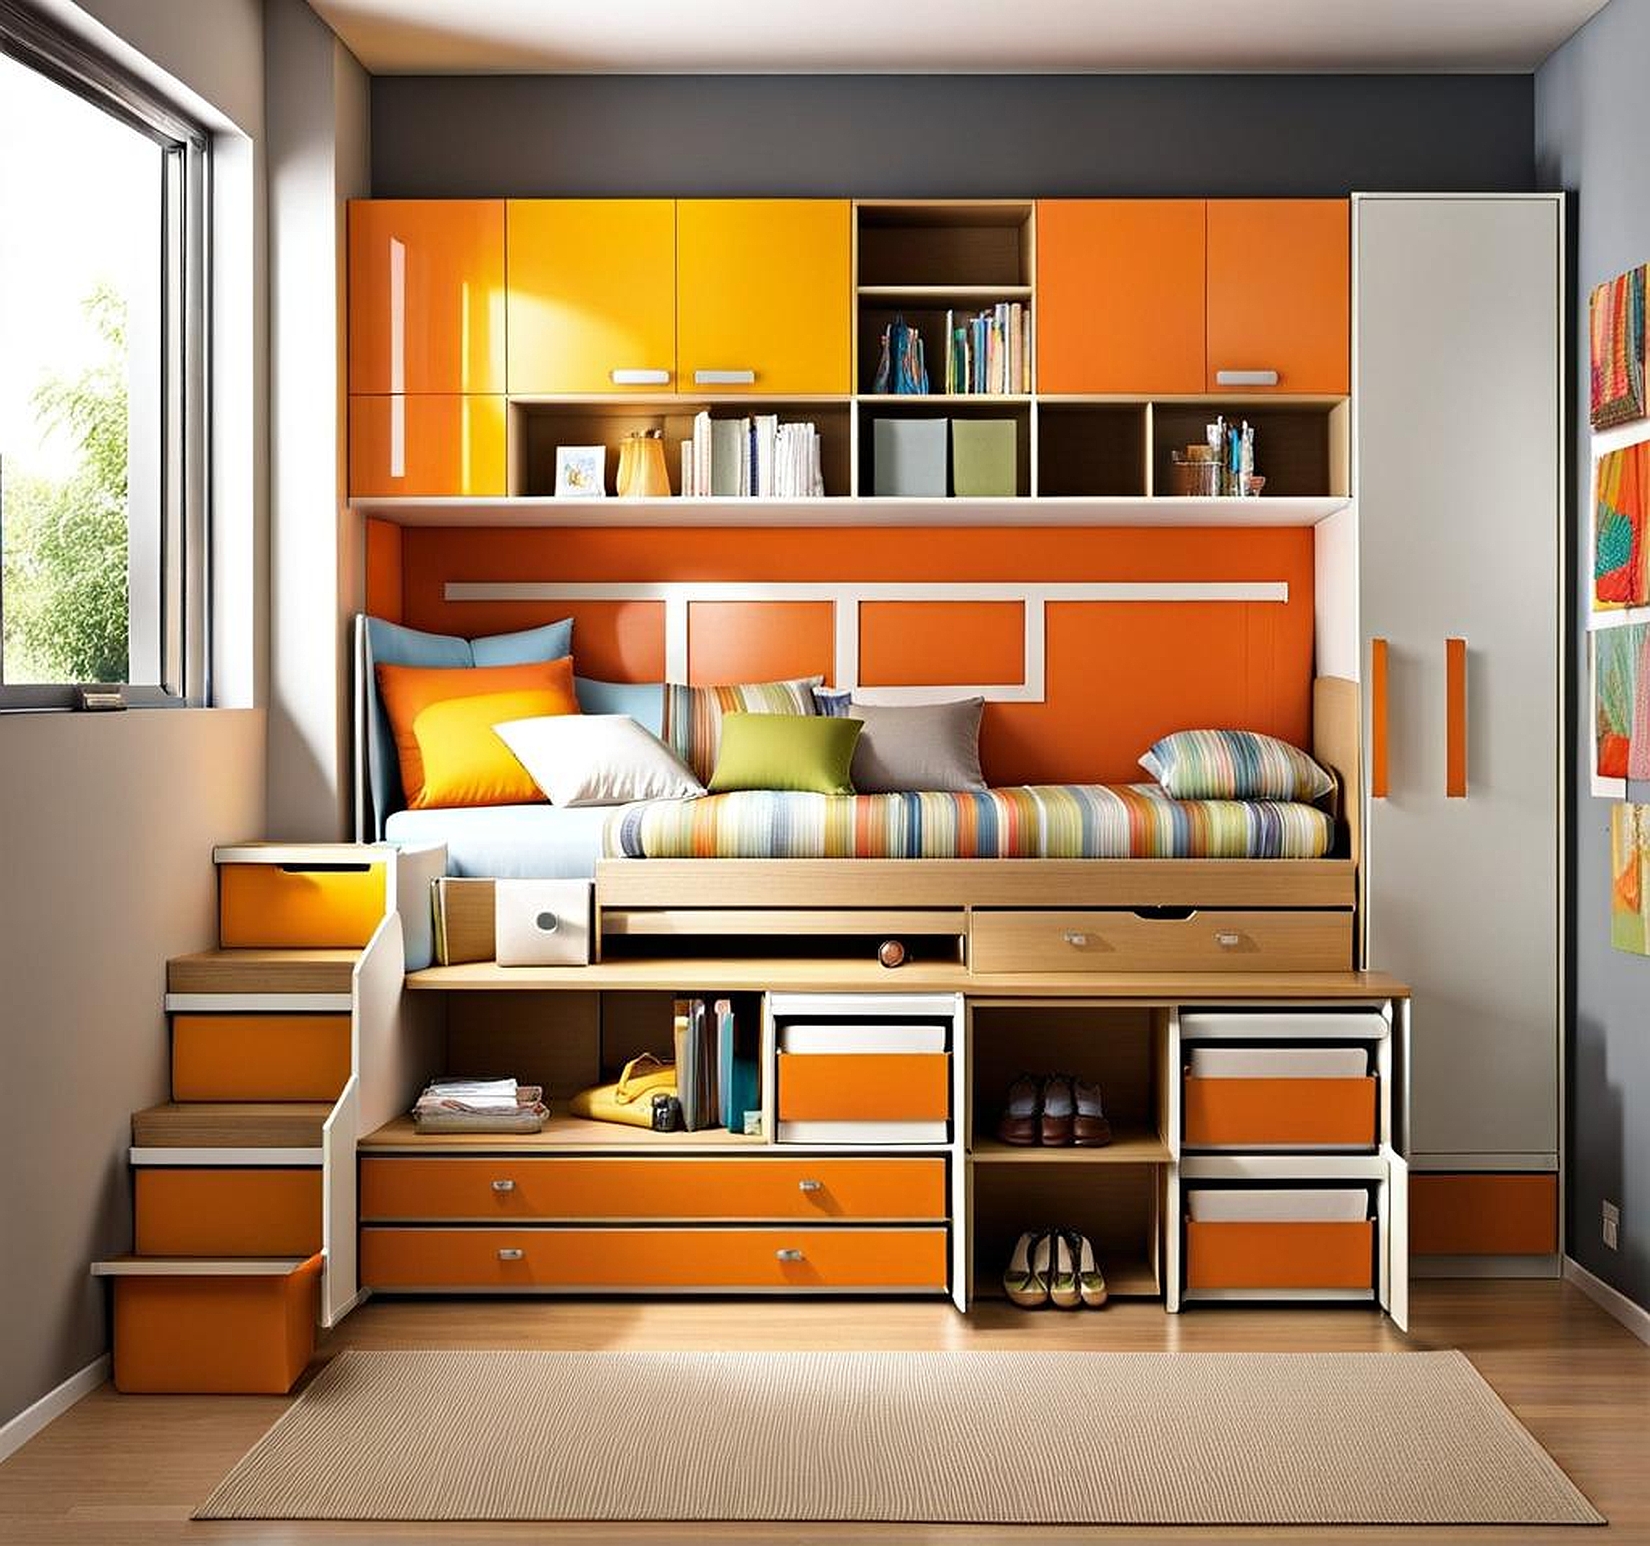 Storage Ideas for Small Bedrooms with Limited Space and Budget